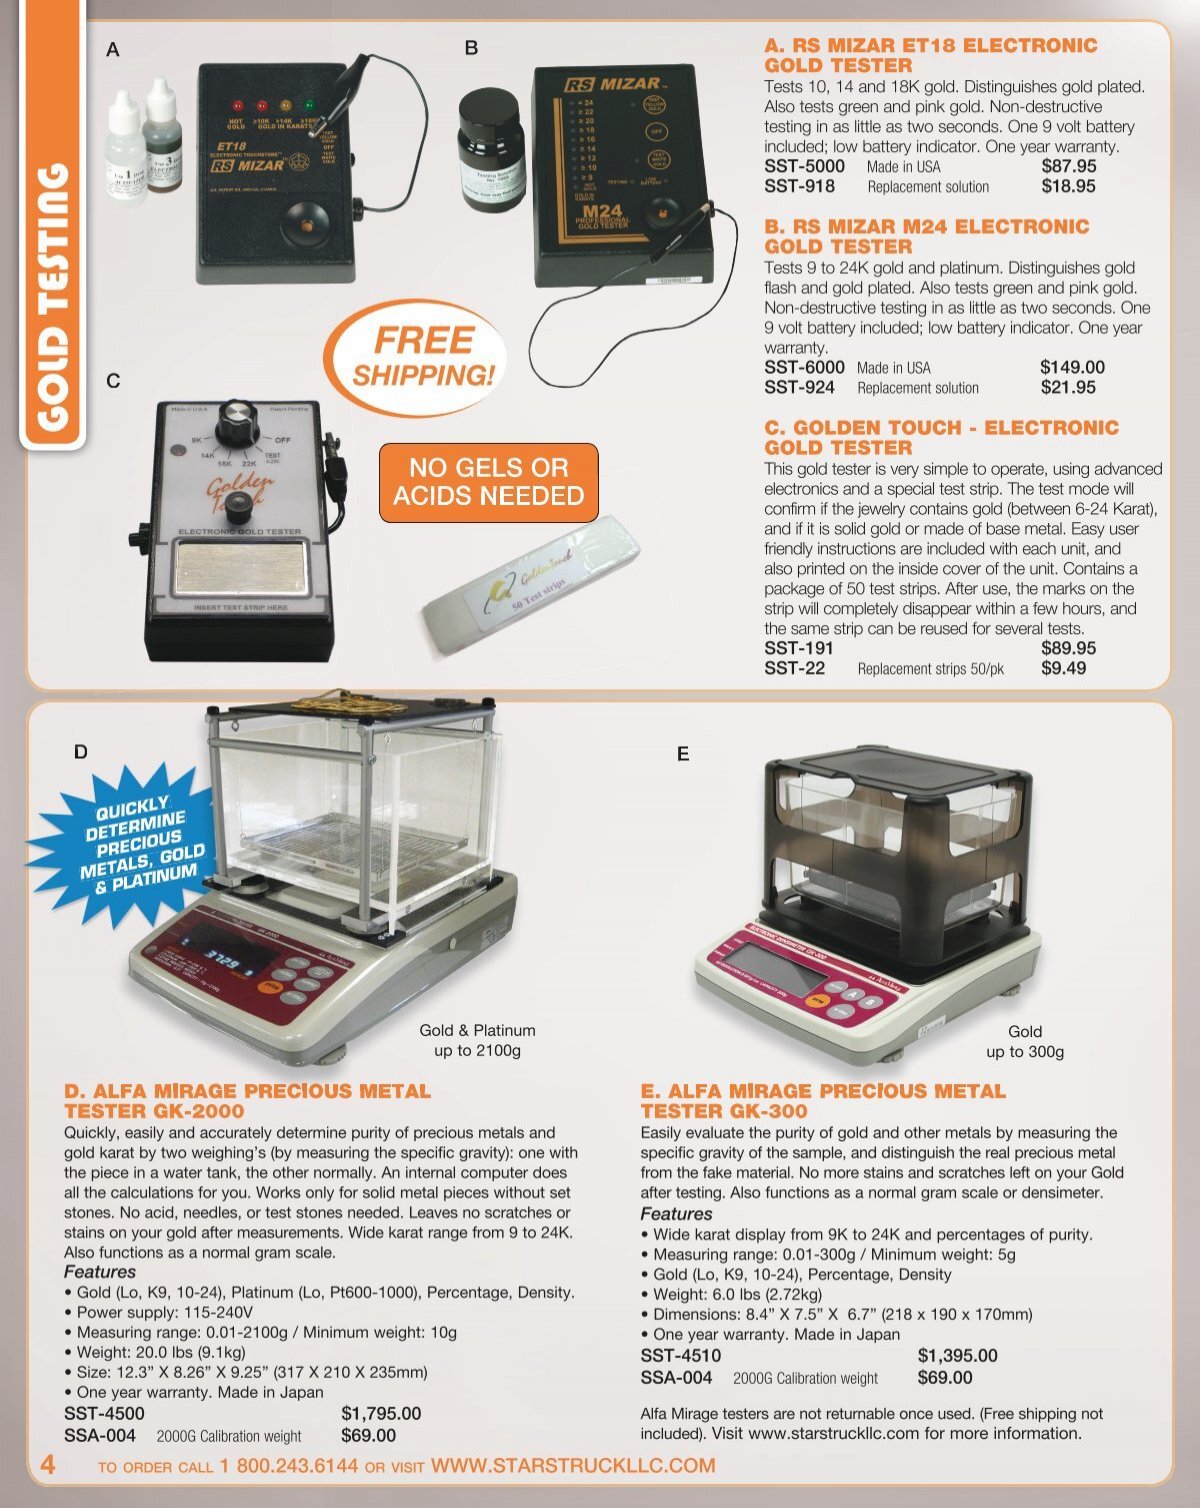 RS Mizar M24 Electronic Gold Tester RS Mizar Gold & Precious Metal Testers  - Jeweler's Tools, Supplies & Watch Batteries by Star Struck